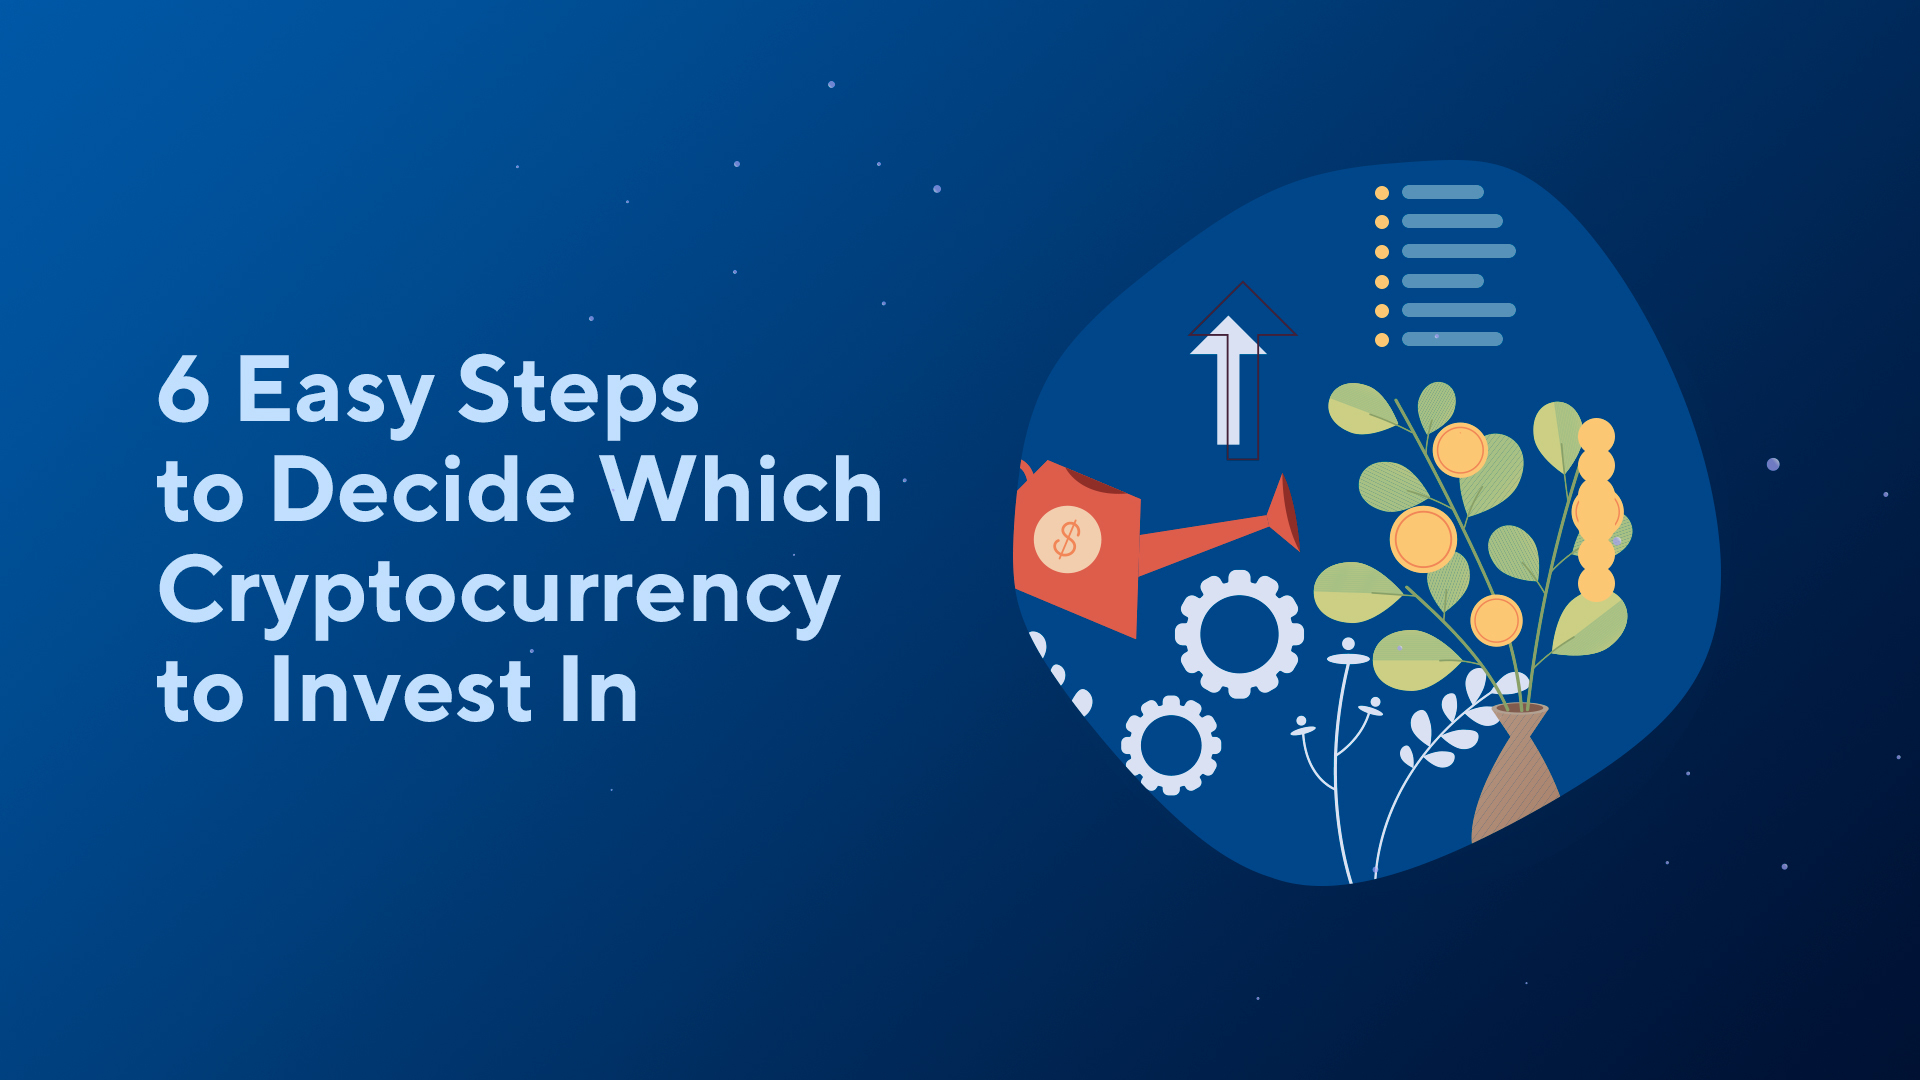 6 Easy Steps to Decide Which Cryptocurrency to Invest In